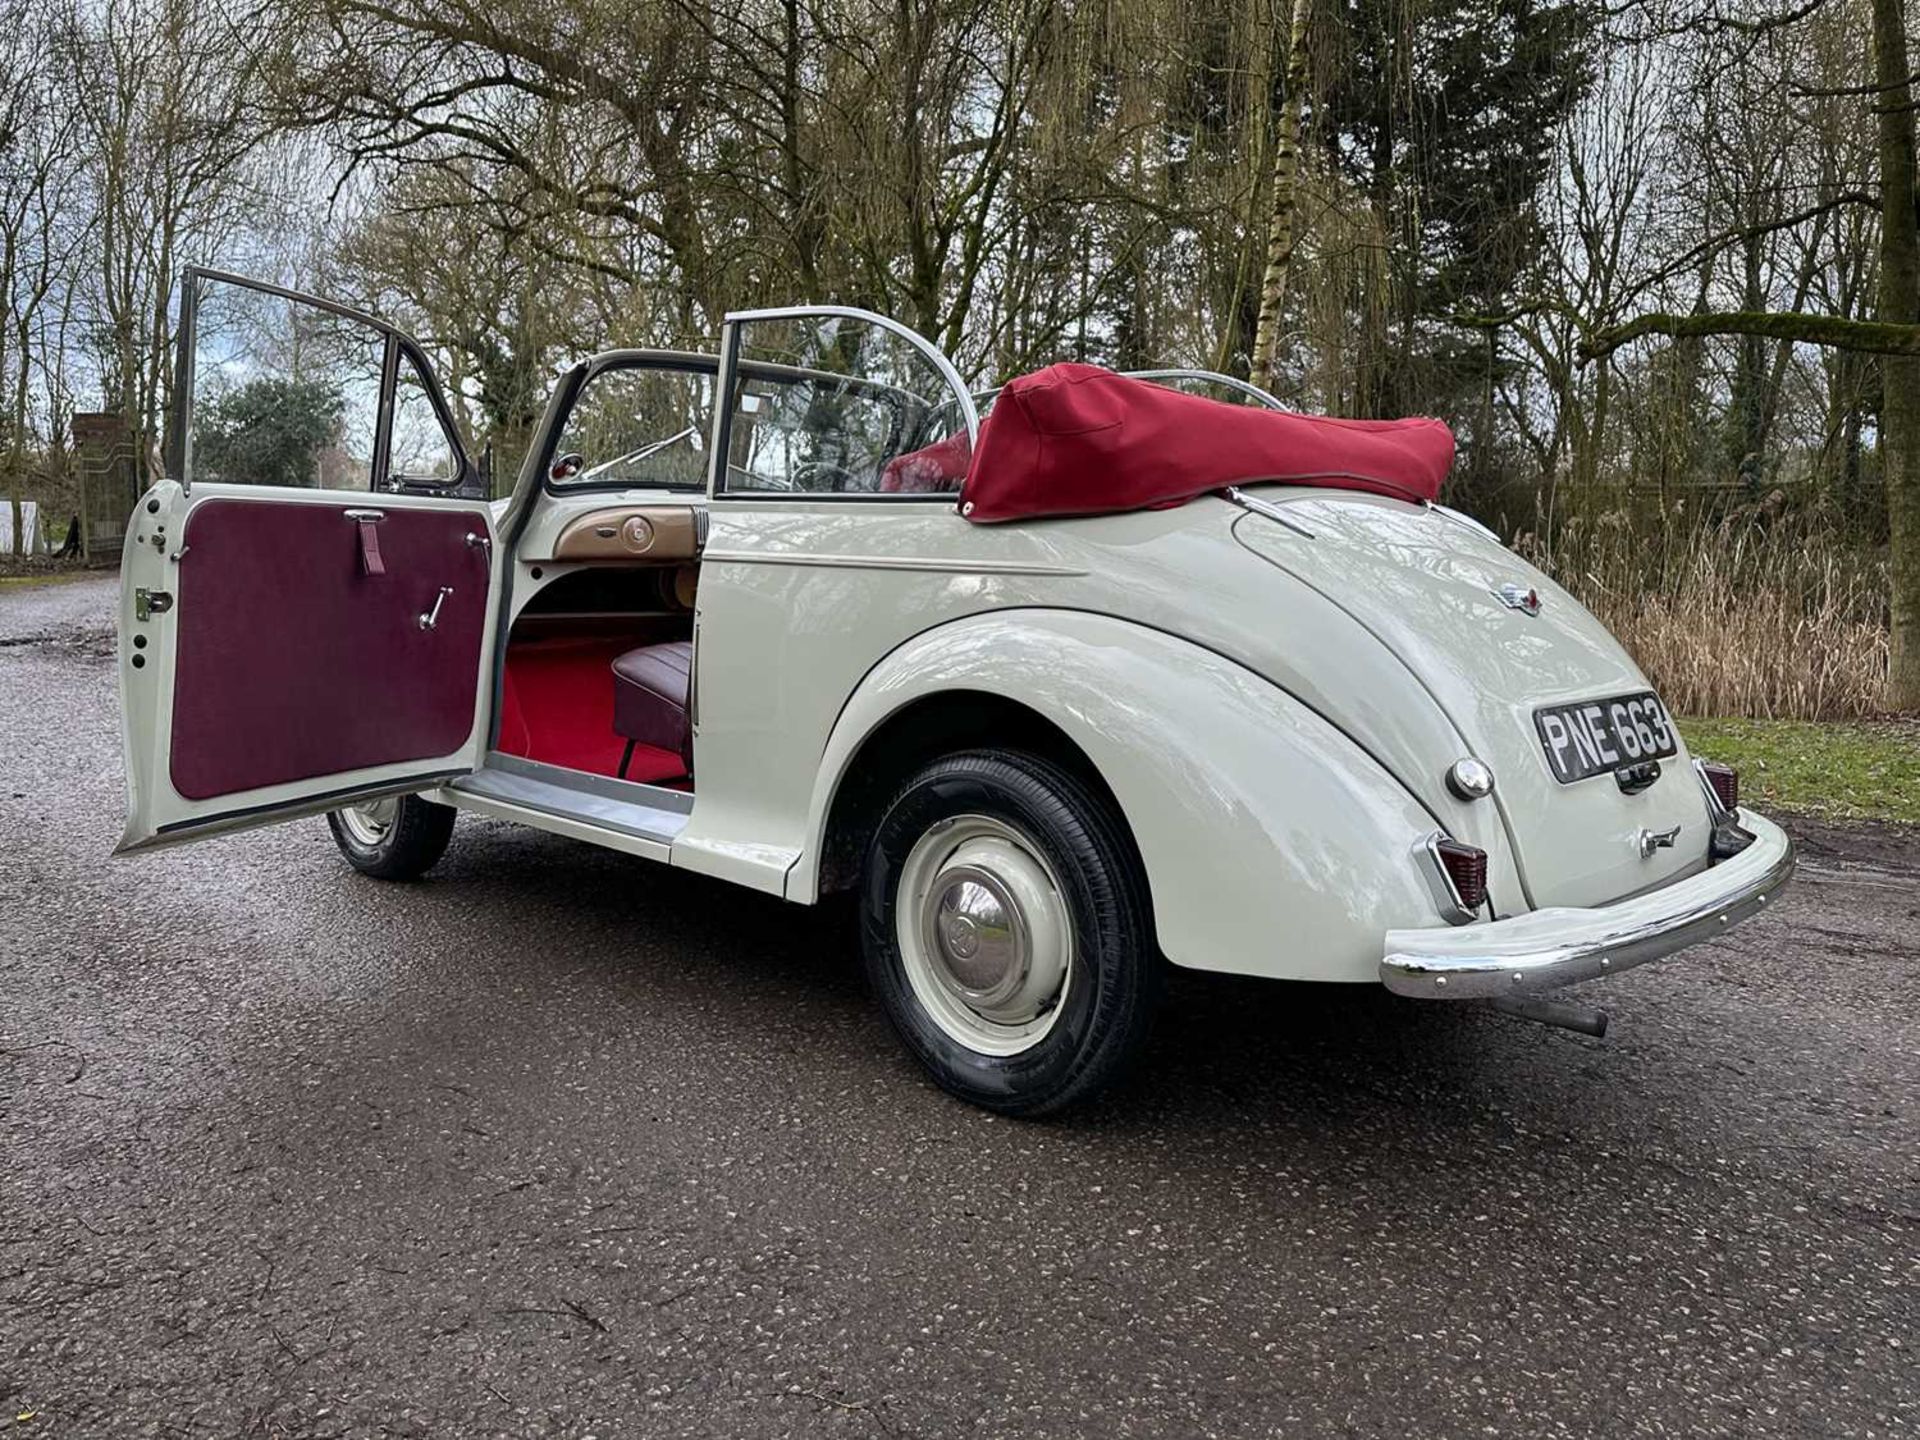 1954 Morris Minor Tourer Fully restored to concours standard - Image 36 of 100